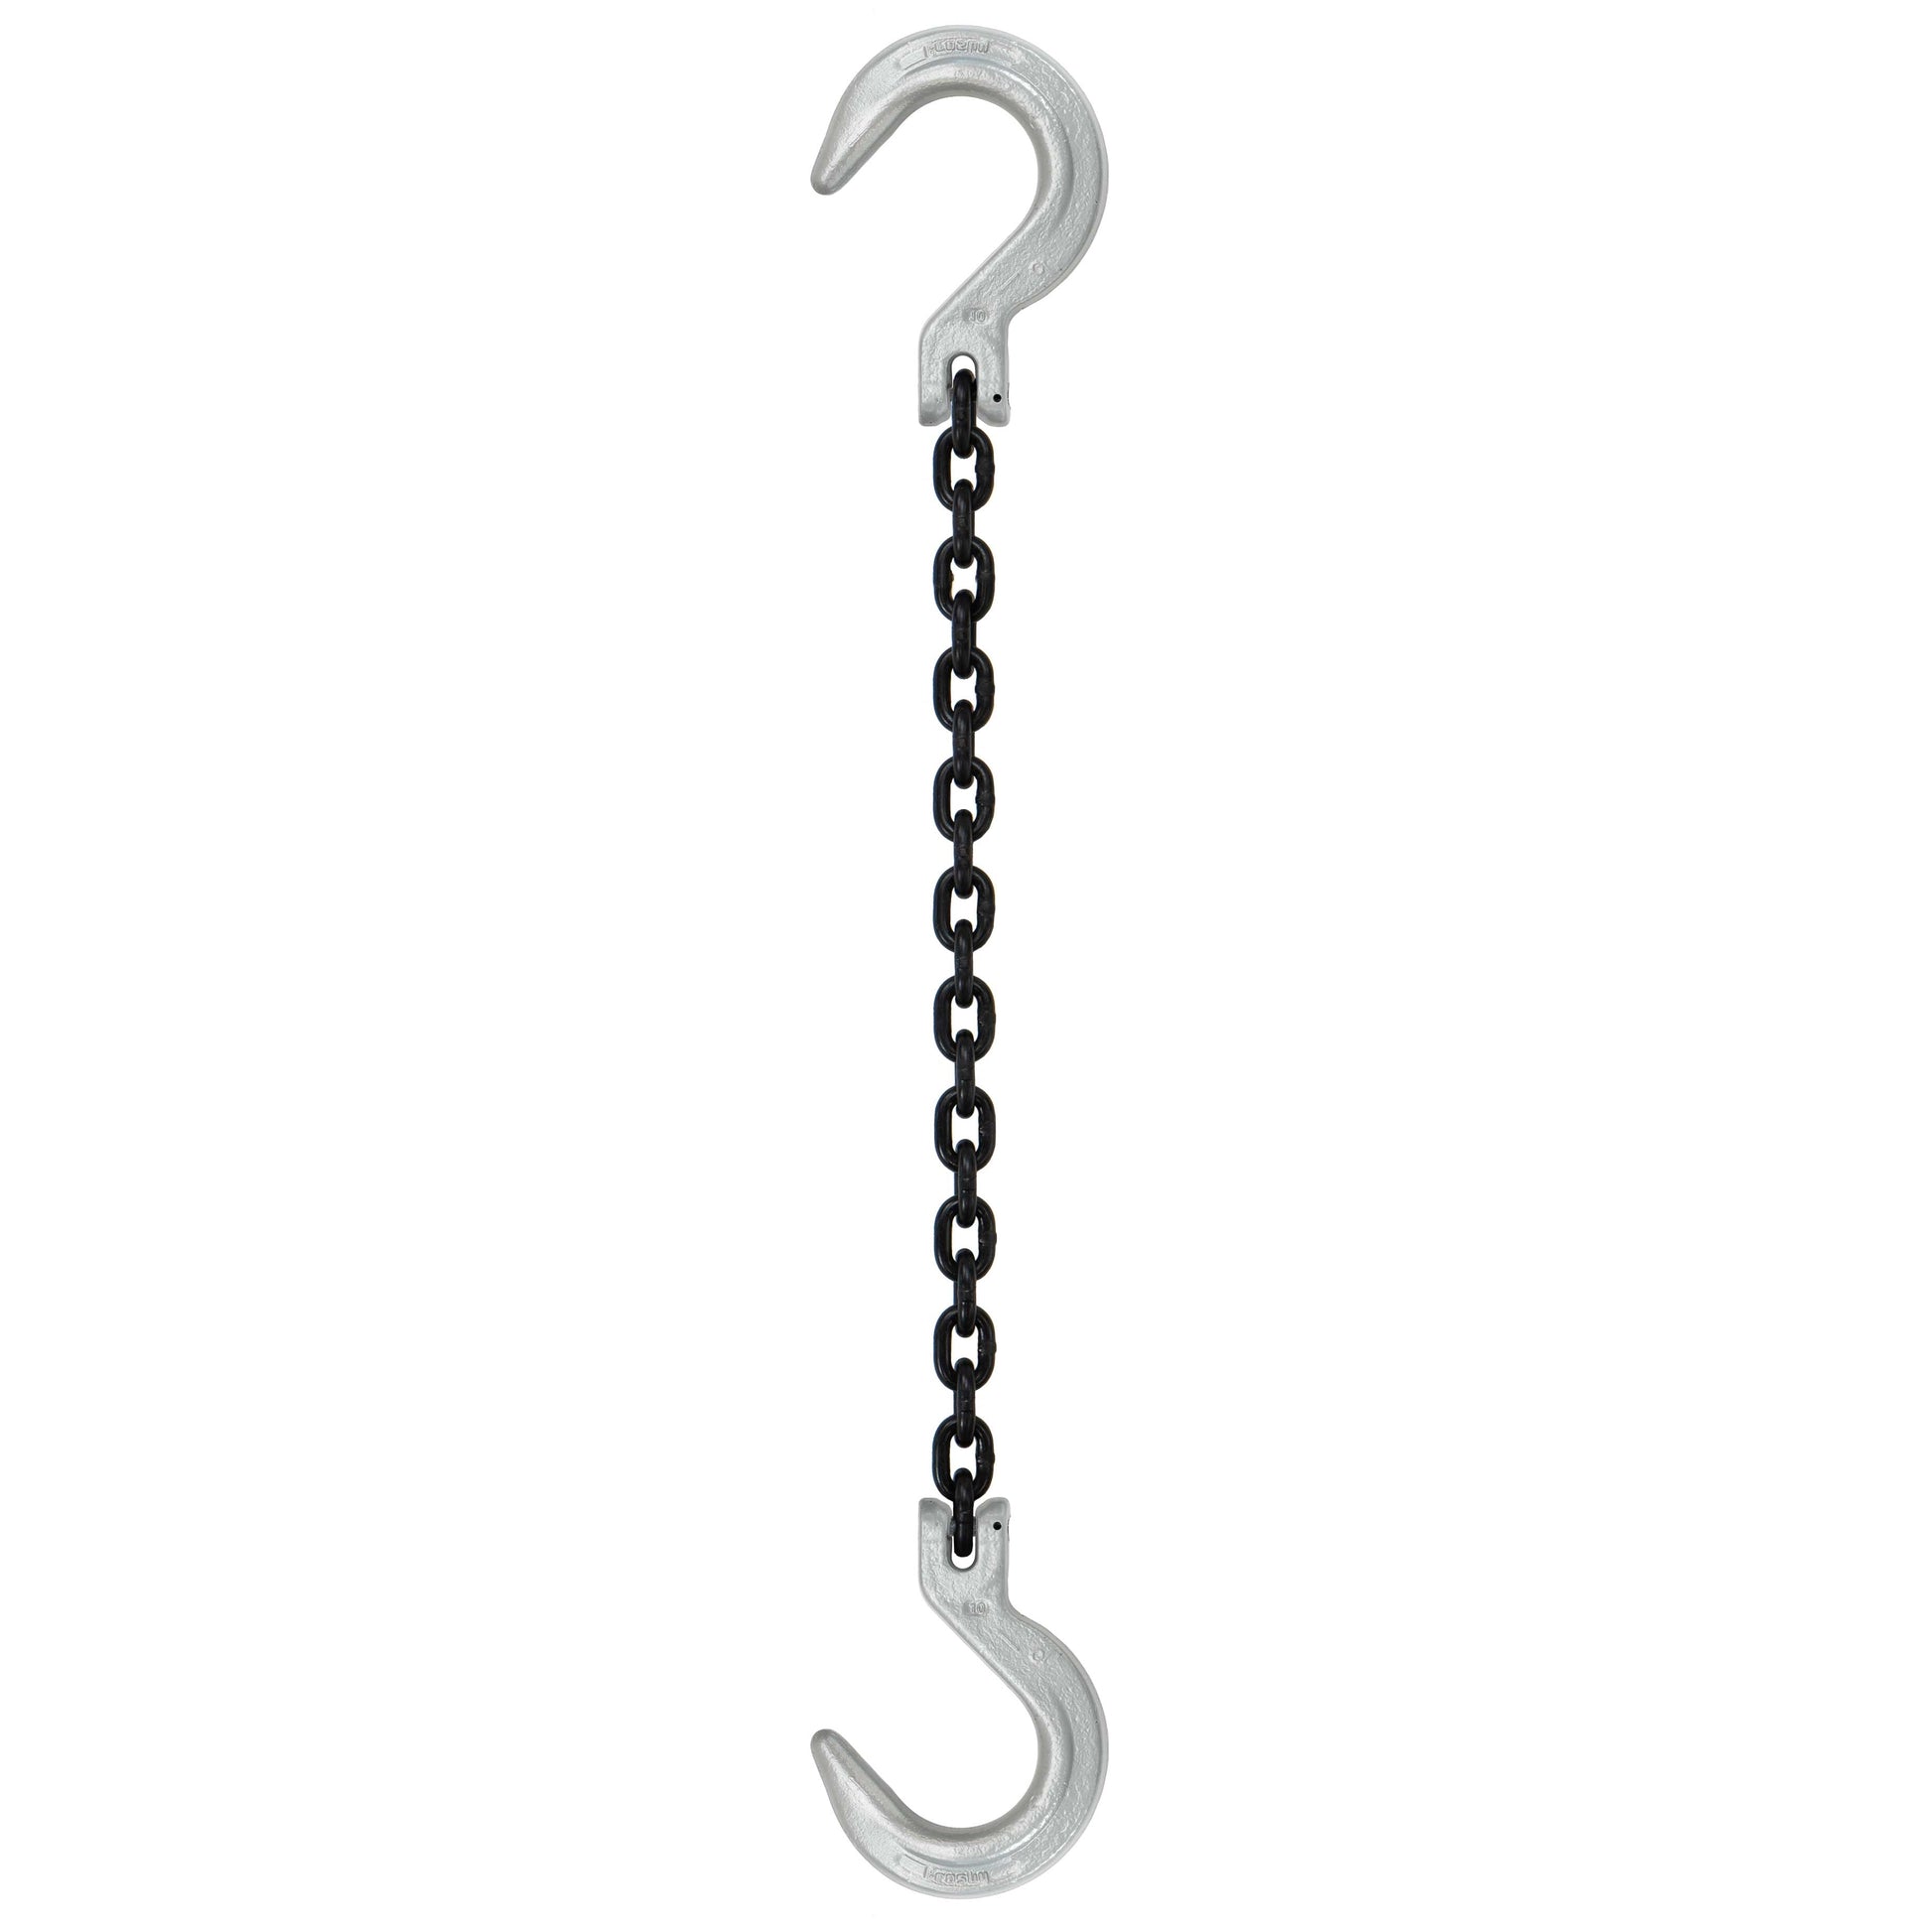 932 inch x 20 foot Domestic Single Leg Chain Sling w Crosby Foundry & Foundry Hooks Grade 100 image 1 of 2